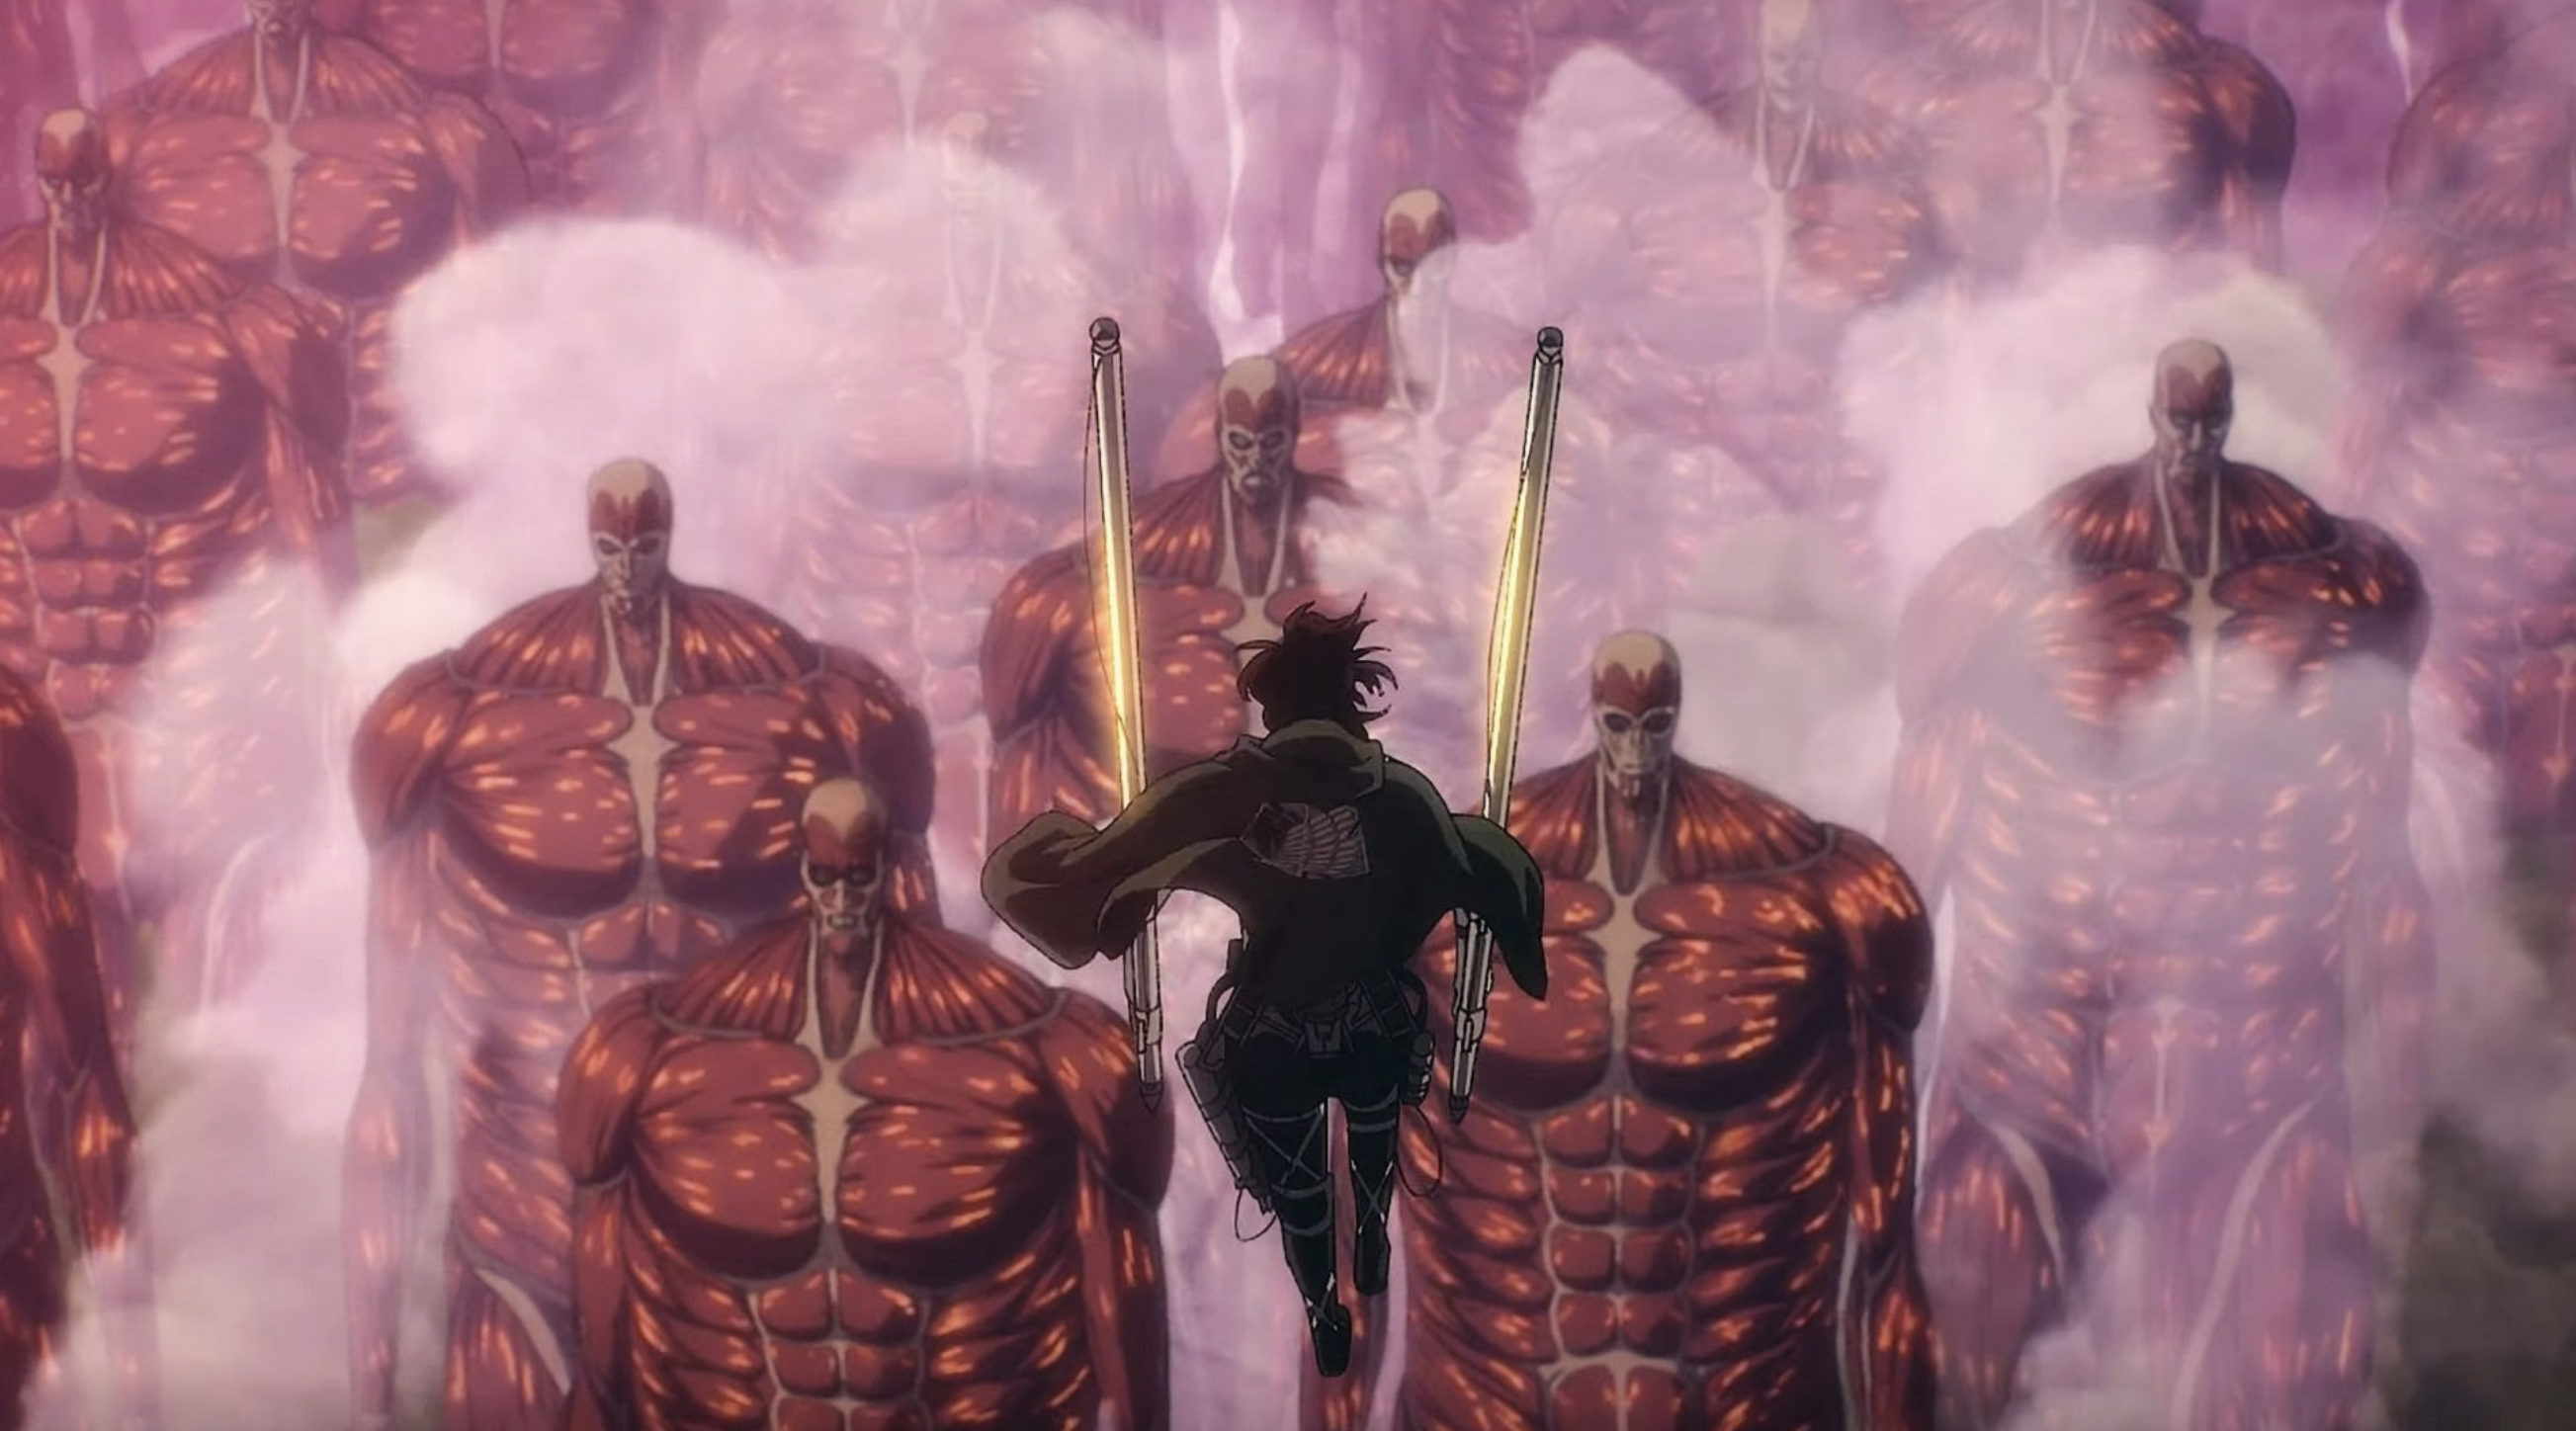 The end begins with Attack on Titan Final Season The Final